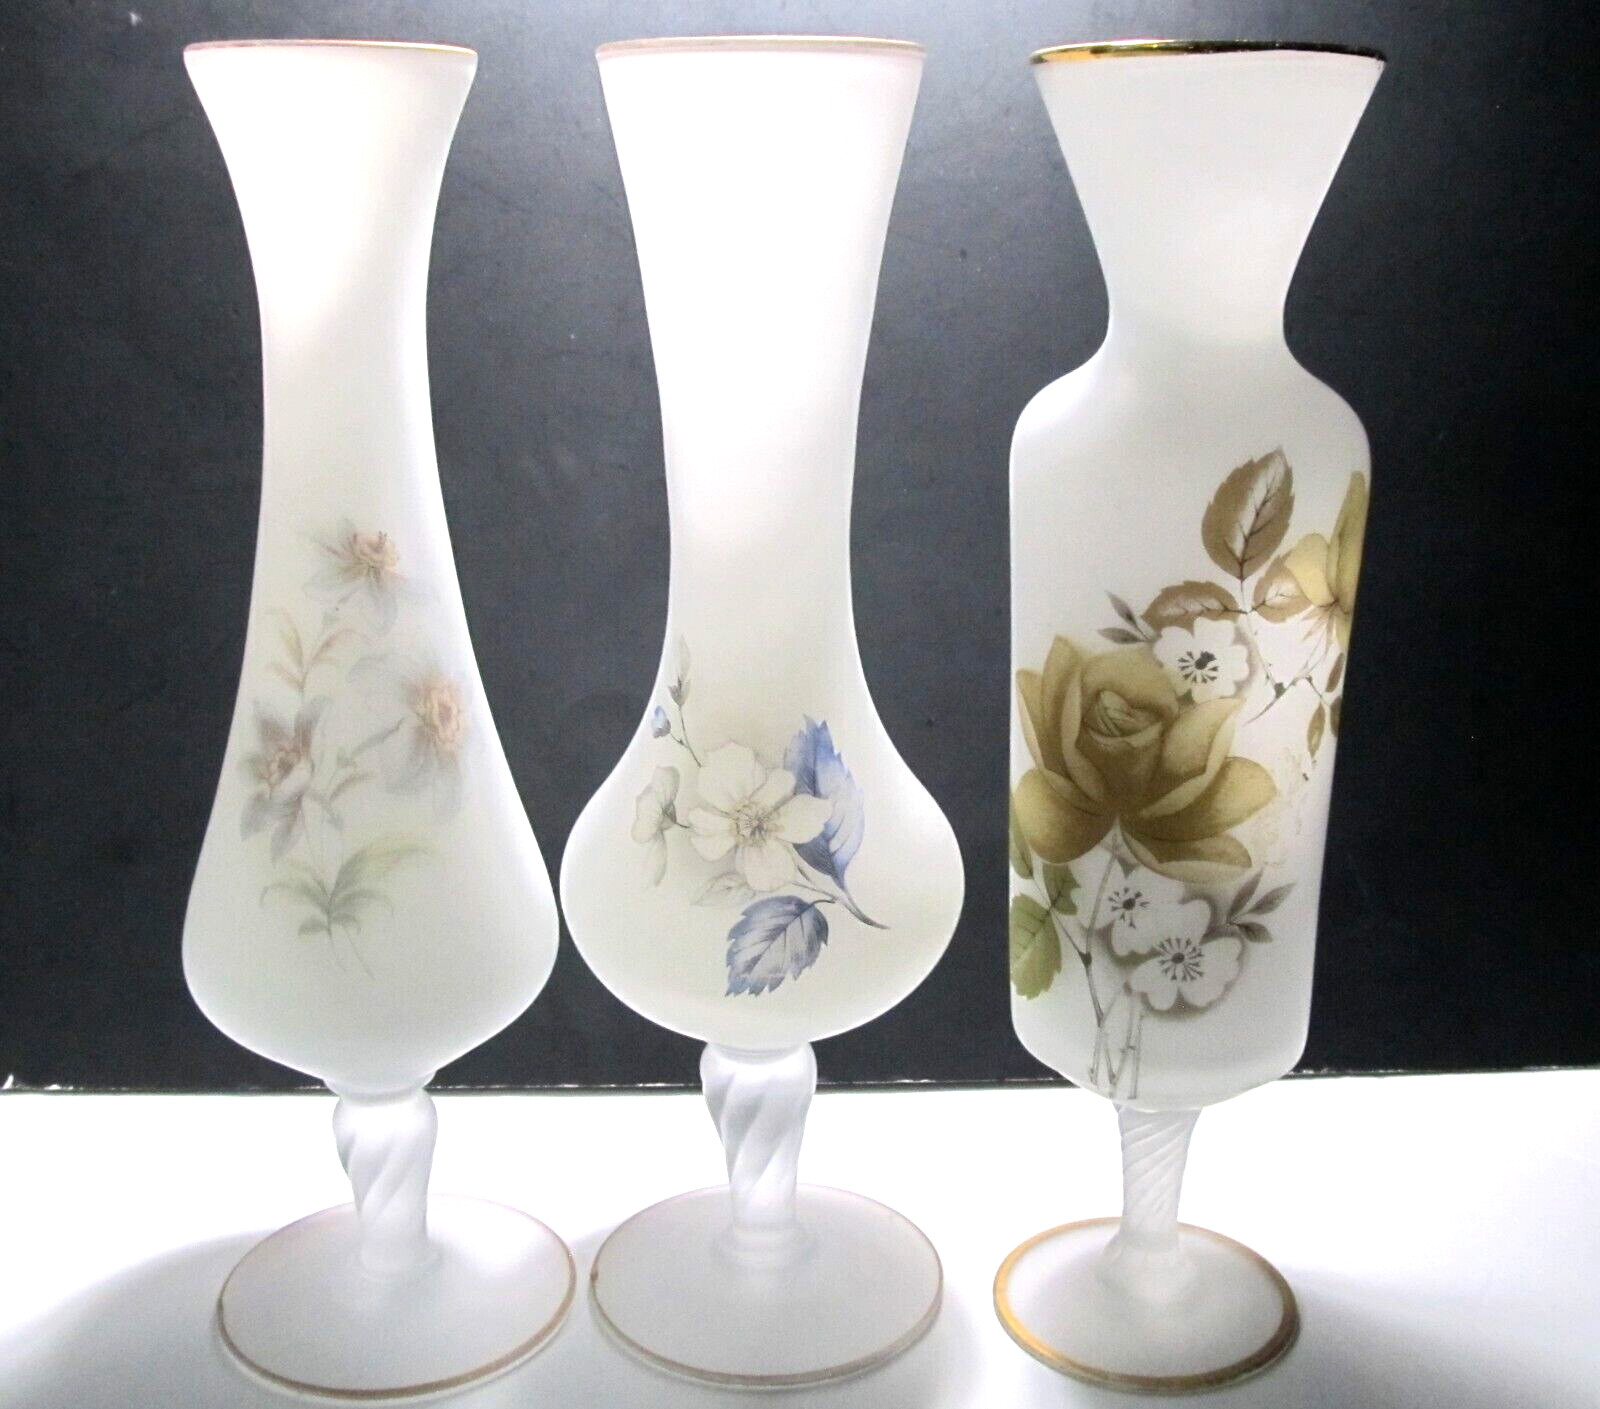 3 Vintage Norleans White Satin Glass Clear Frosted 10” Painted Flower Bud Vases